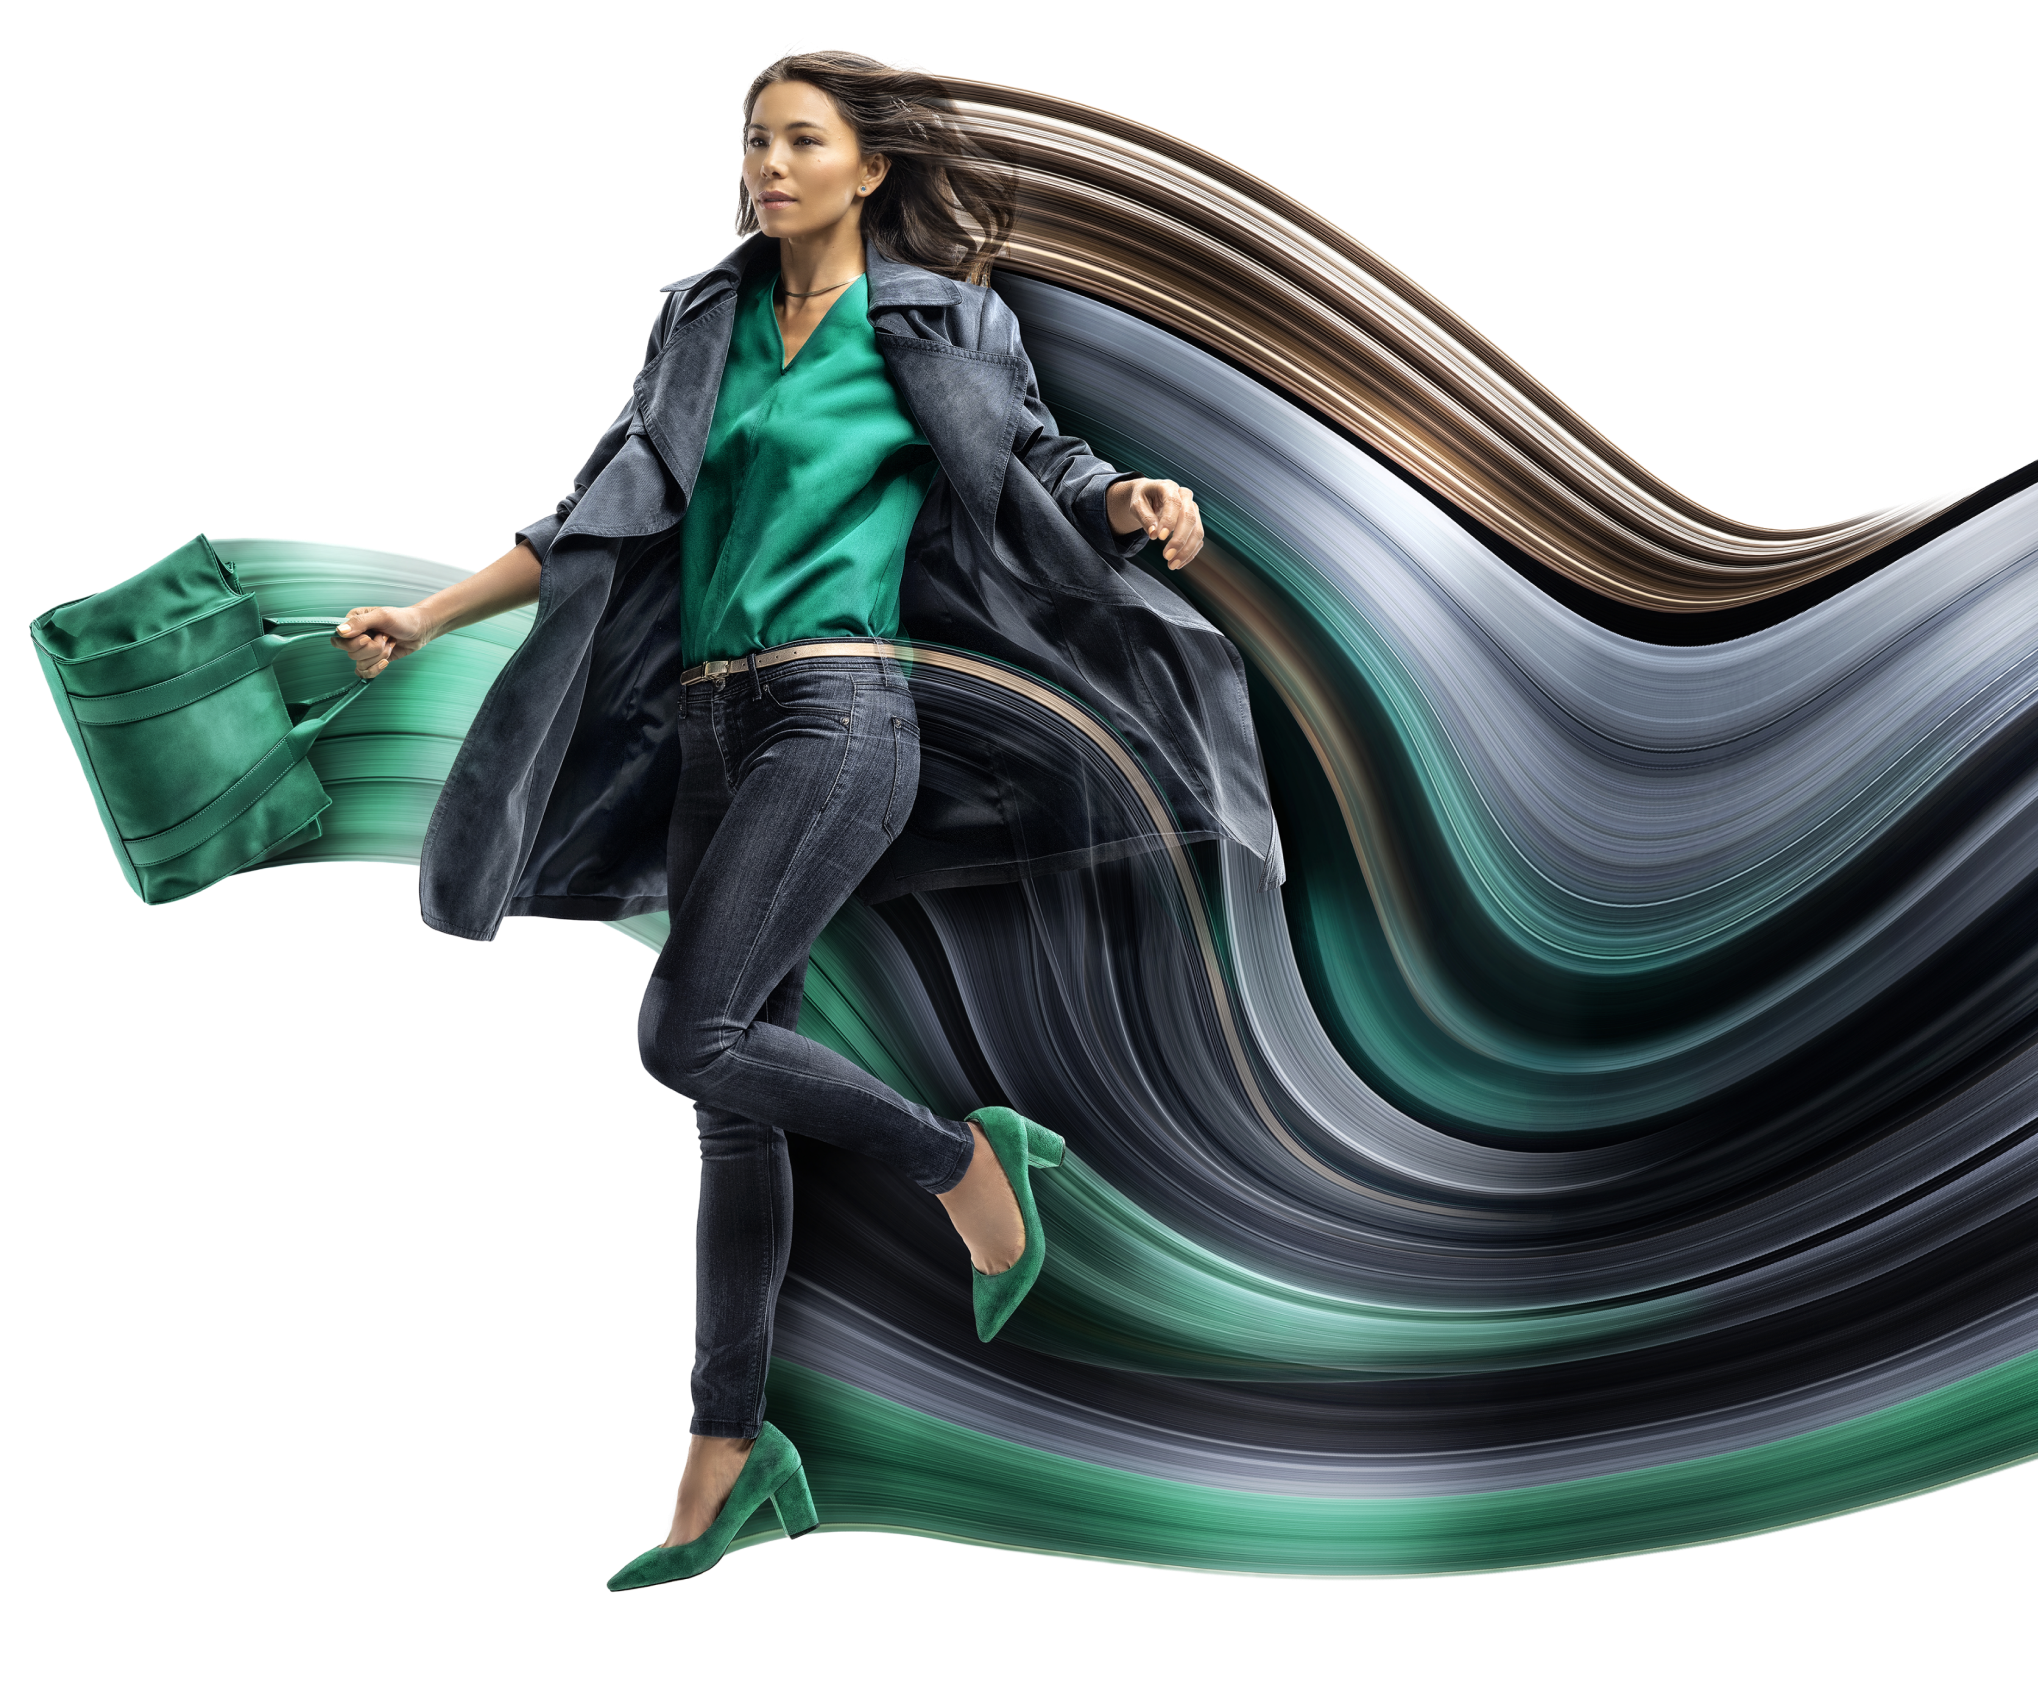 Business woman with bag in hand, leaping ahead.